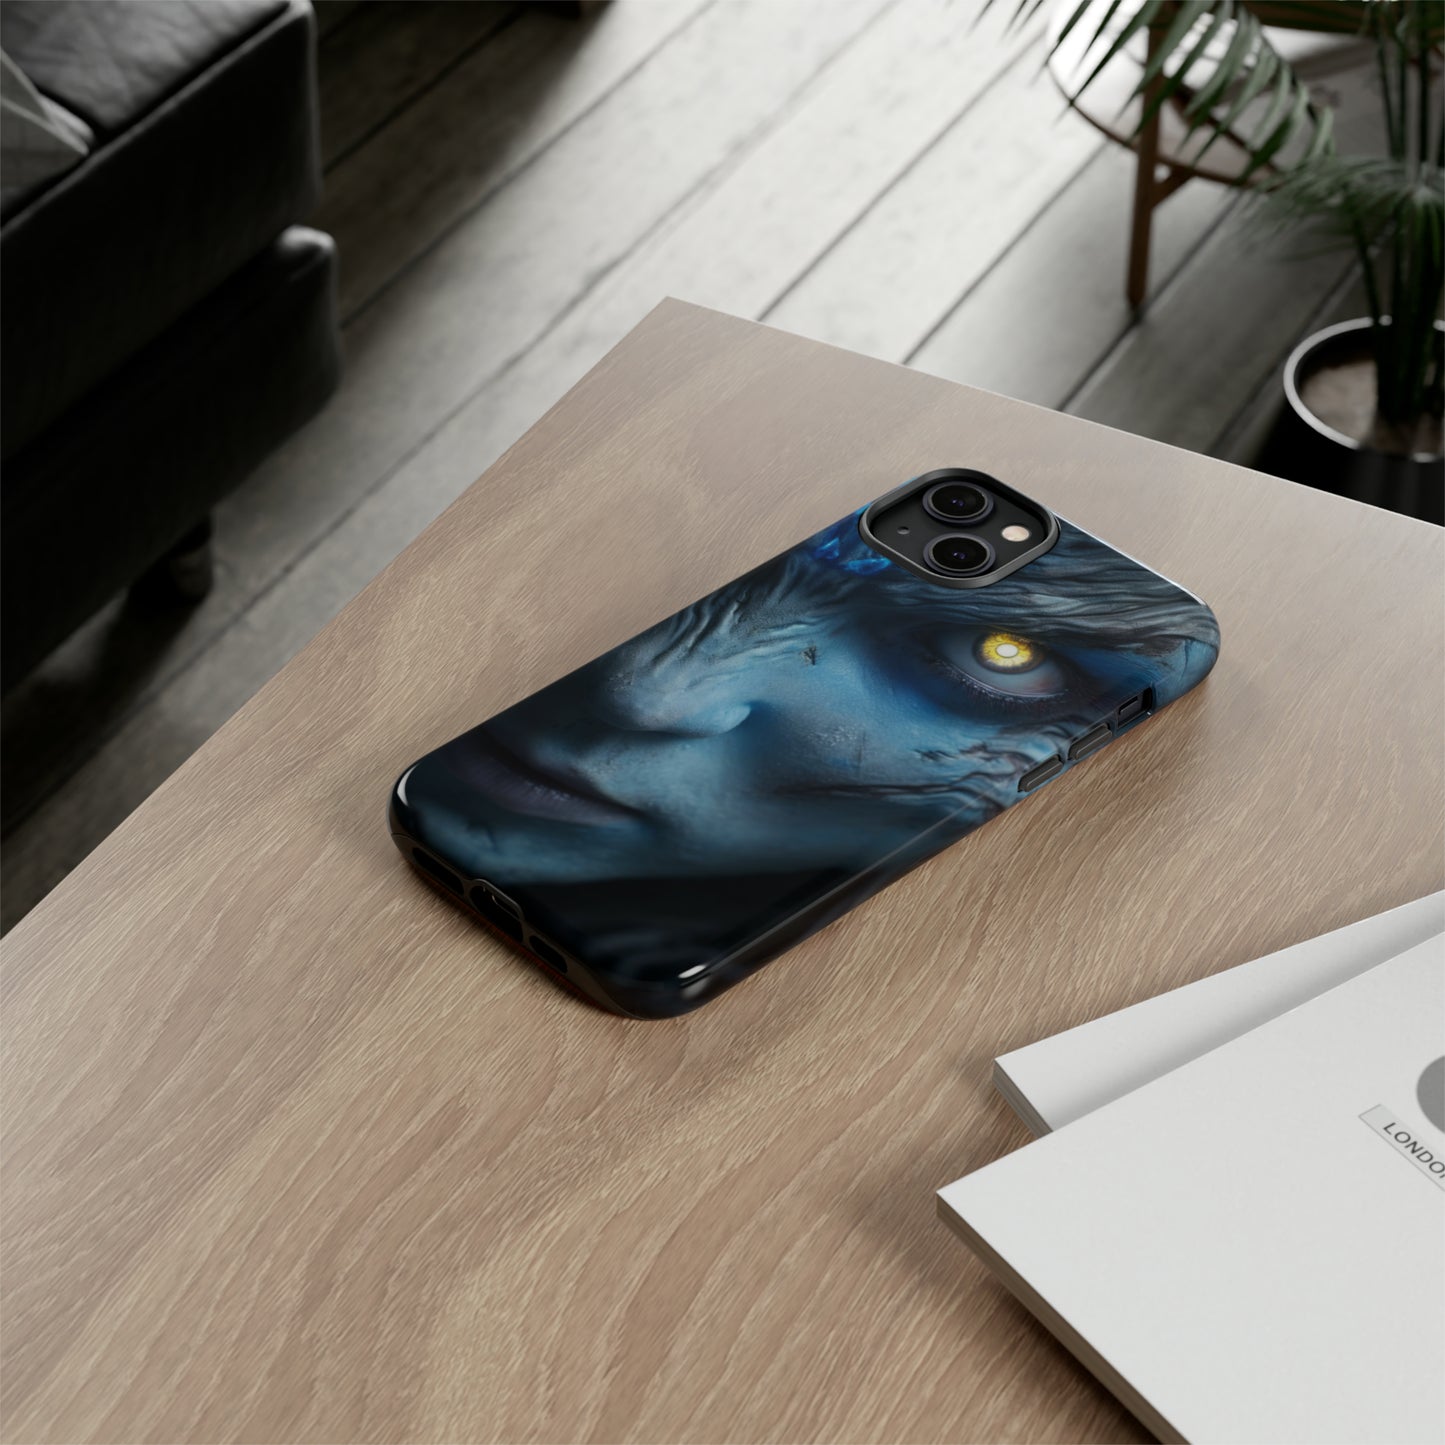 Mystic Blue-skinned Woman Protective Phone Case - Glowing Gaze Design for iPhone, Samsung, Pixel